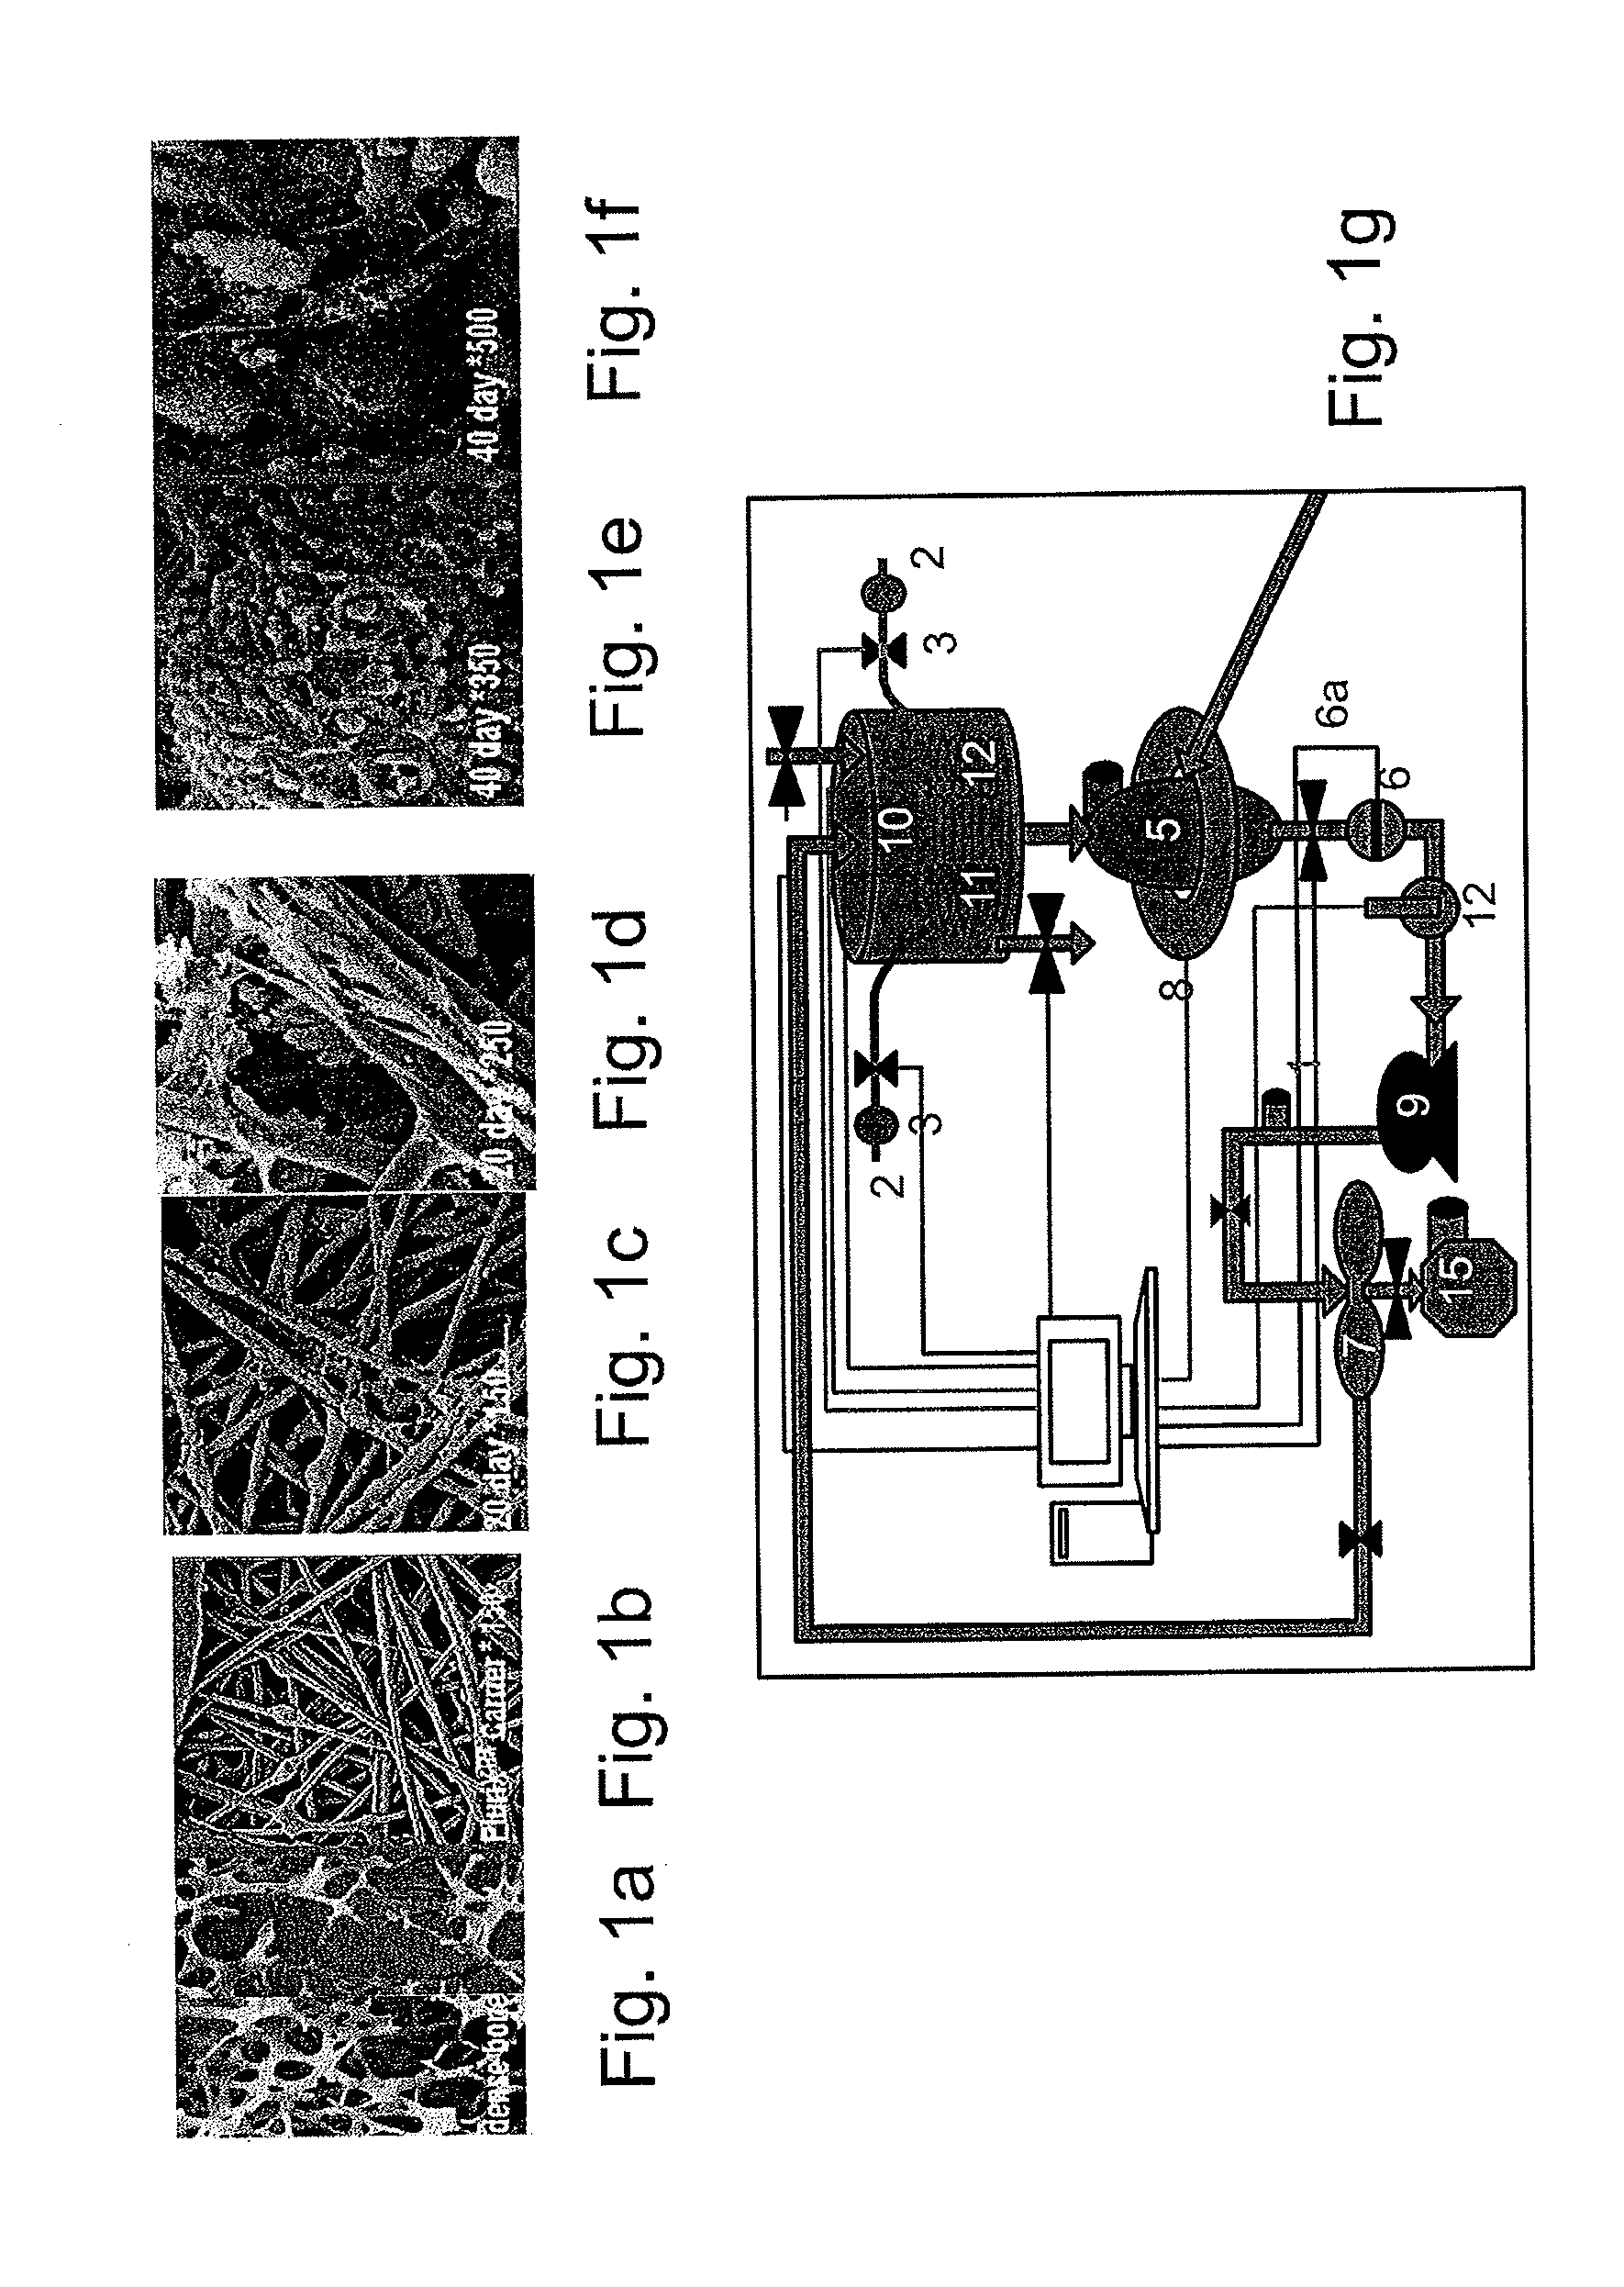 Methods for treating radiation or chemical injury